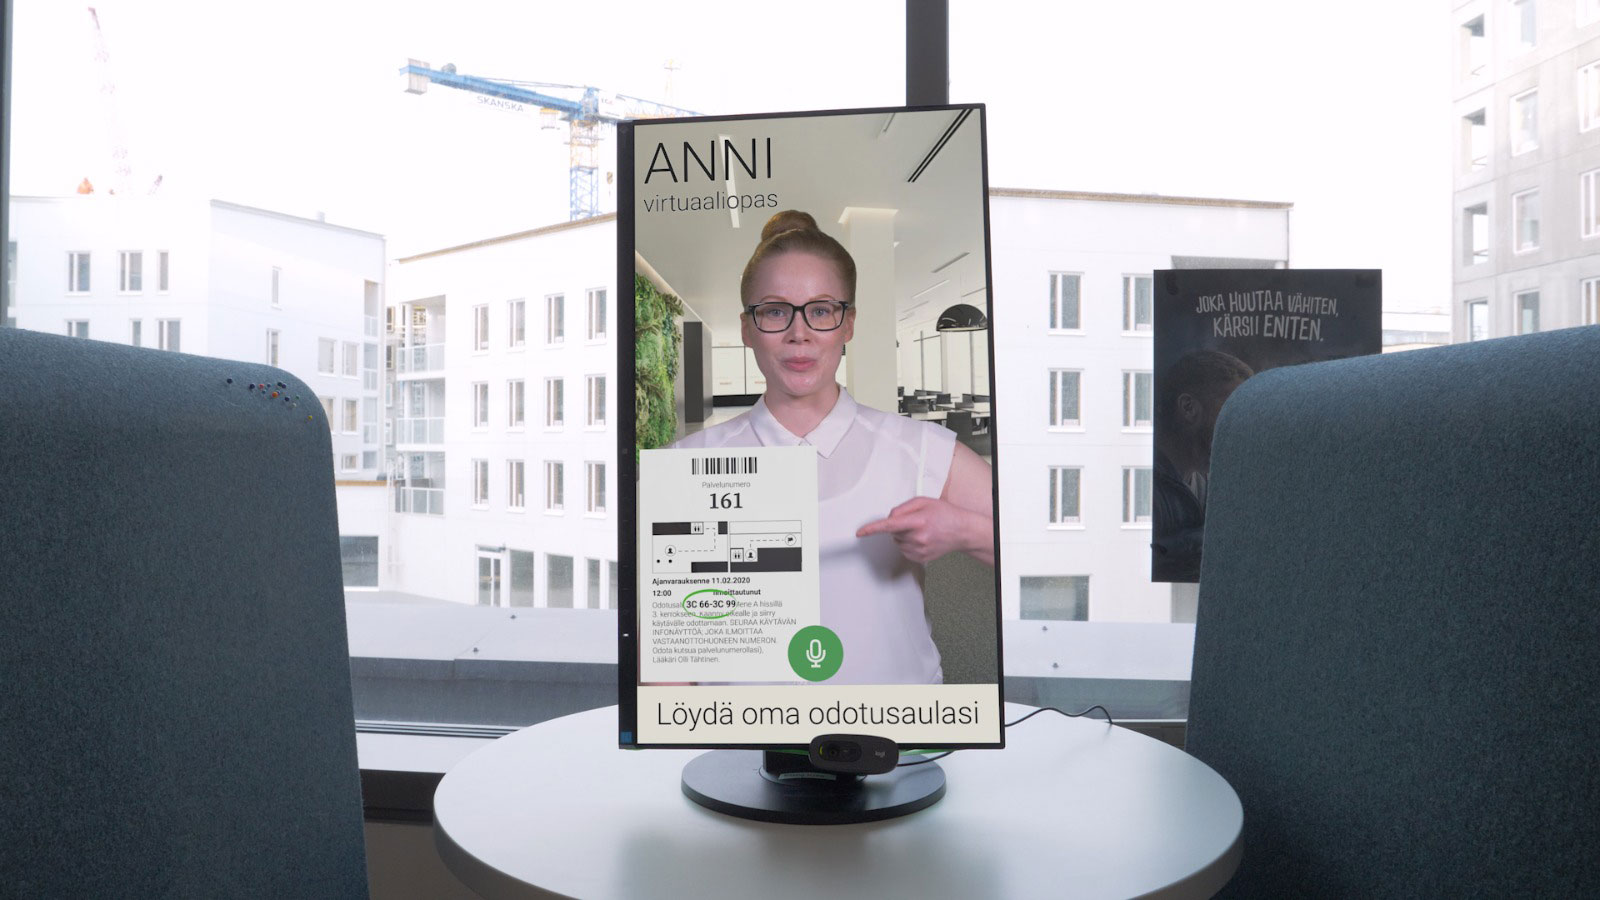 Anni, a virtual assistant by Radical Rabbit that uses speech recognition.